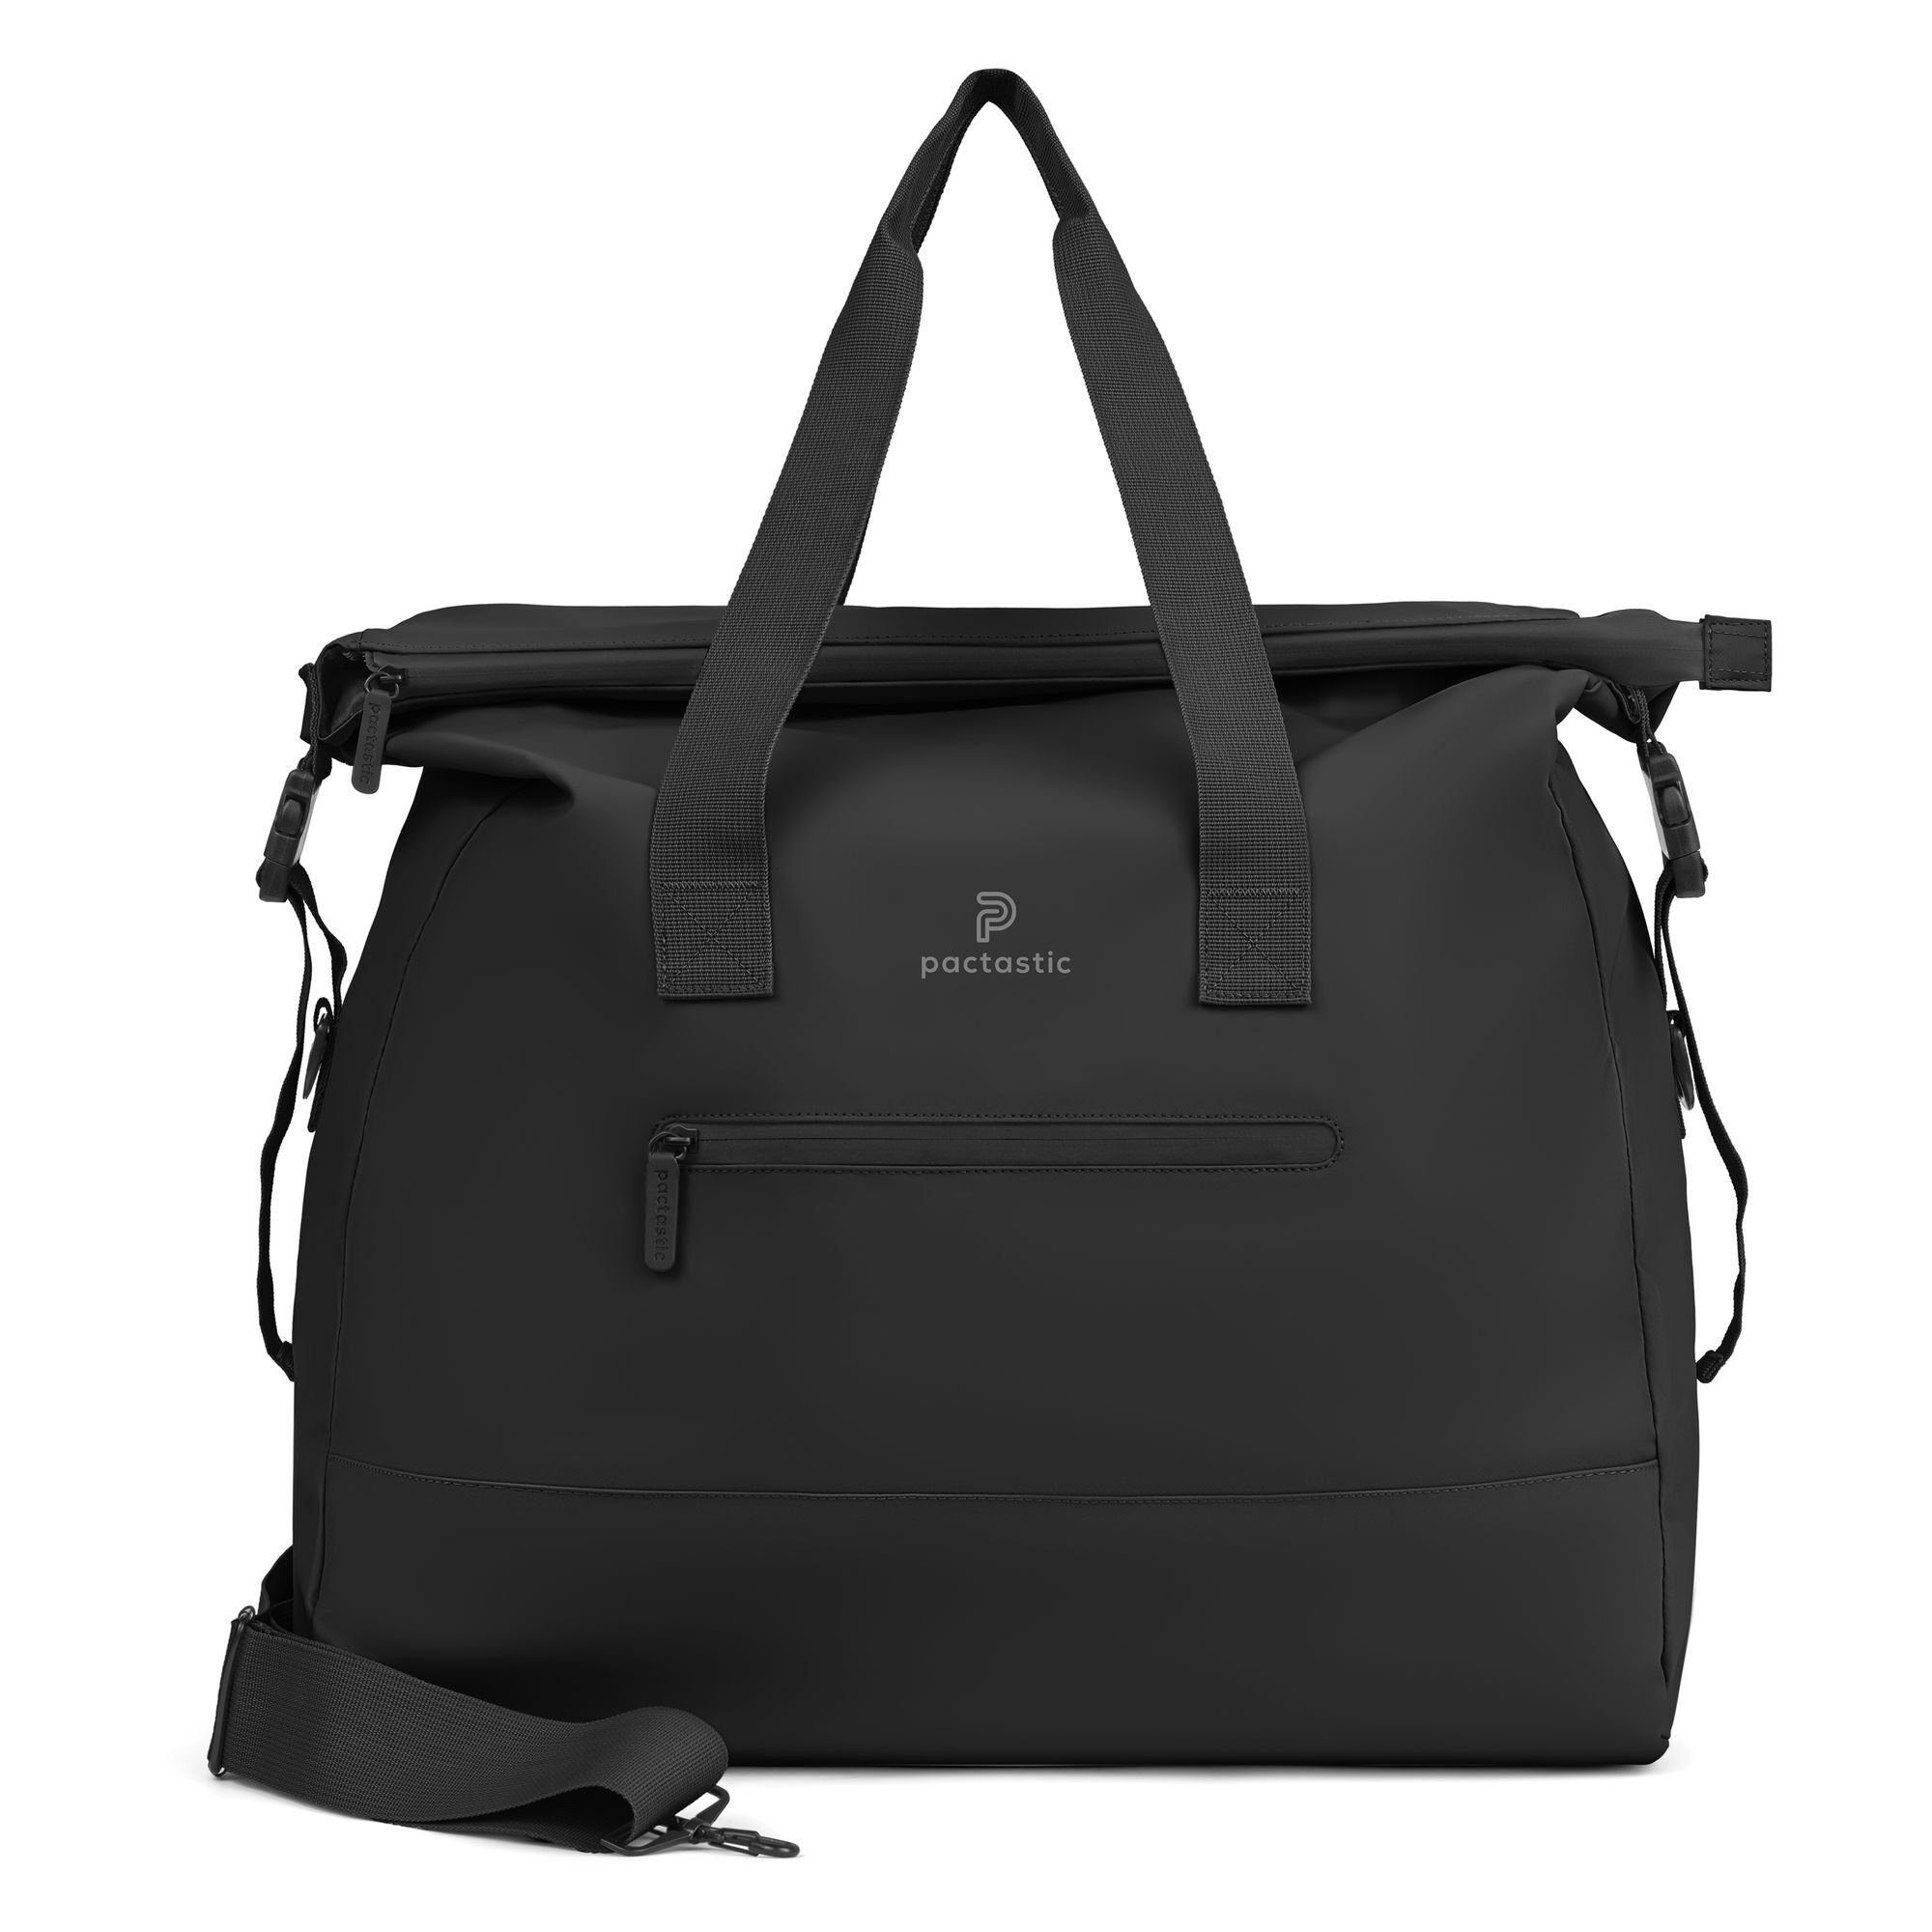 Pactastic Weekender Urban Collection, Veganes black Tech-Material